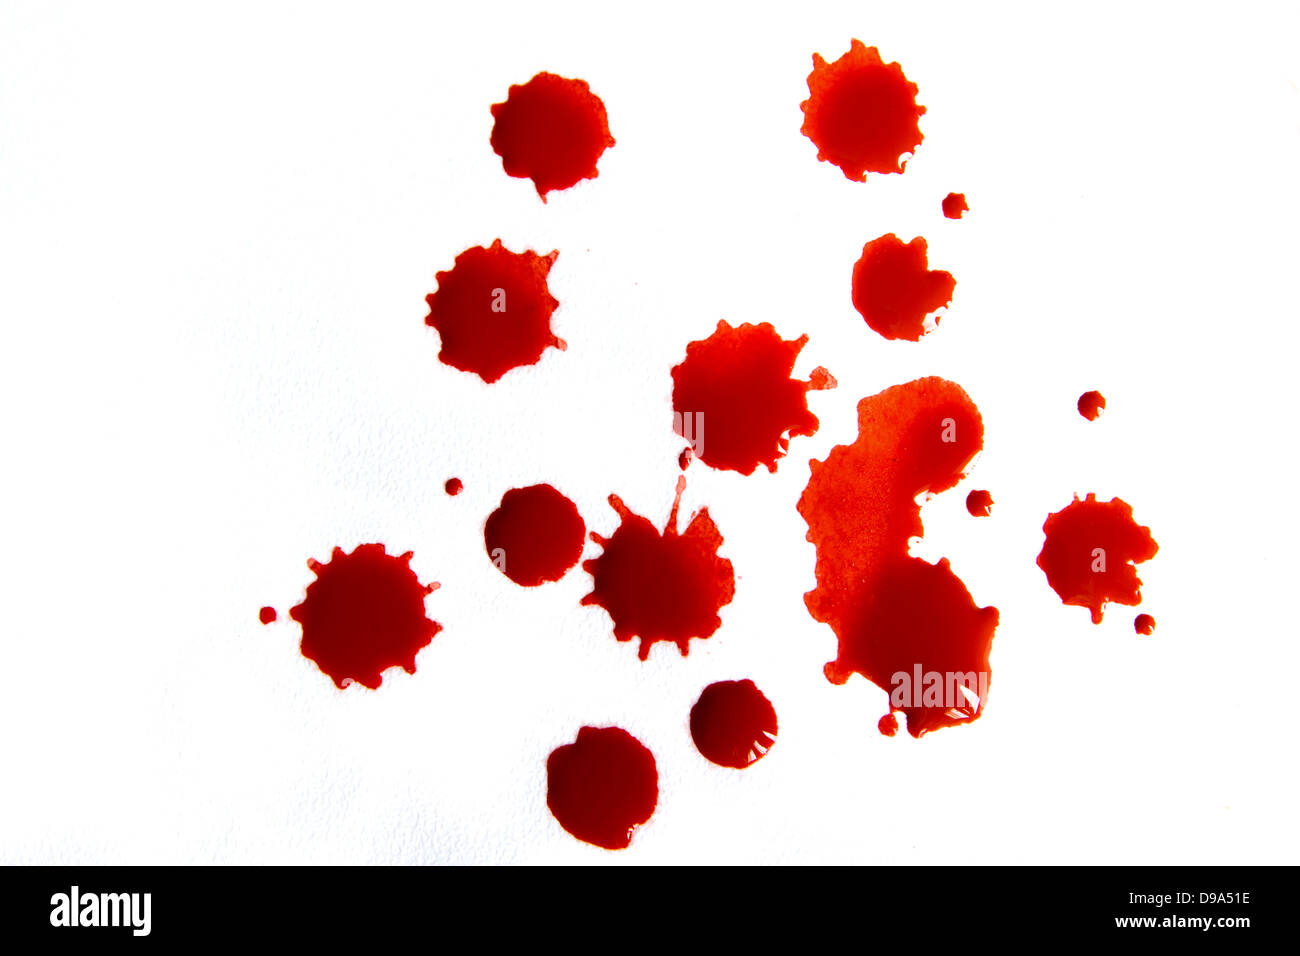 Blood droplets (stains, splatter) isolated on white background close up Stock Photo